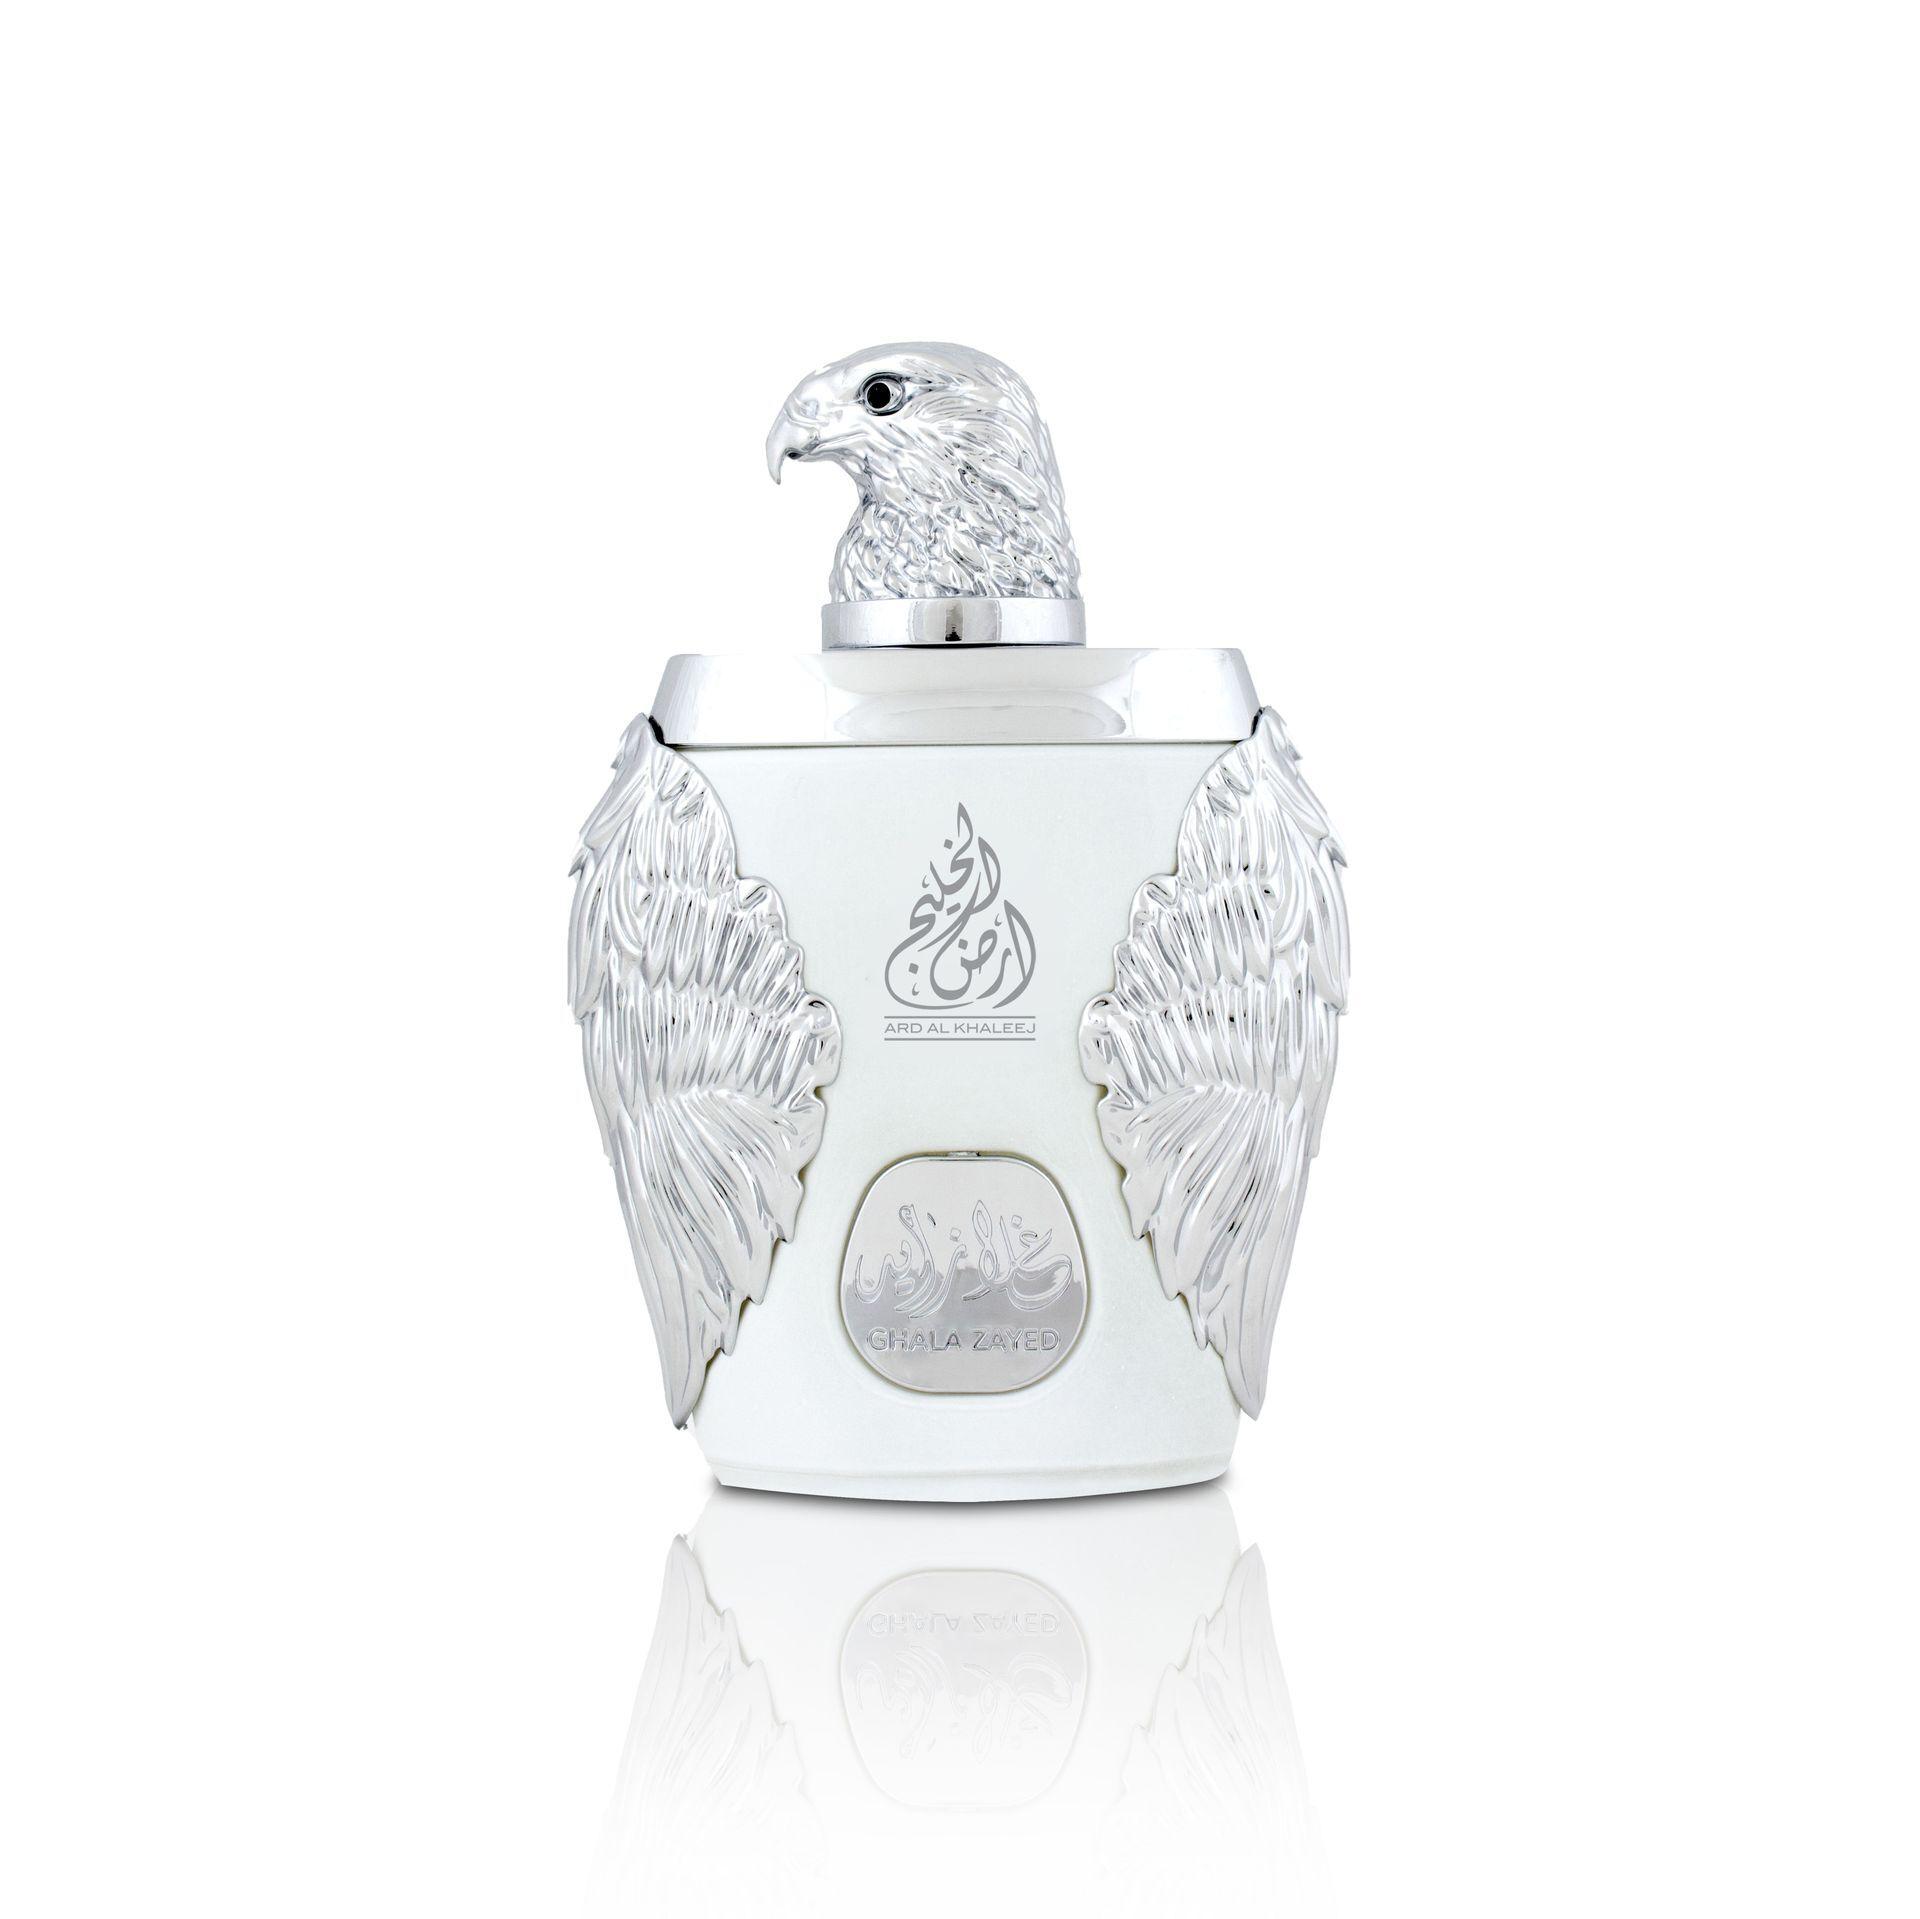 Ghala Zayed Luxury Silver Perfume Eau De Parfum 100Ml By Ard Al Khaleej 2 Introducing Ghala Zayed Luxury Silver Perfume / Eau De Parfum 100Ml By Ard Al Khaleej, A Testament To Timeless Elegance And Sophistication. This Men'S Fragrance Is A Symphony Of Scents Meticulously Composed To Make An Enduring Impression. Soghaat Gifts &Amp; Fragrances